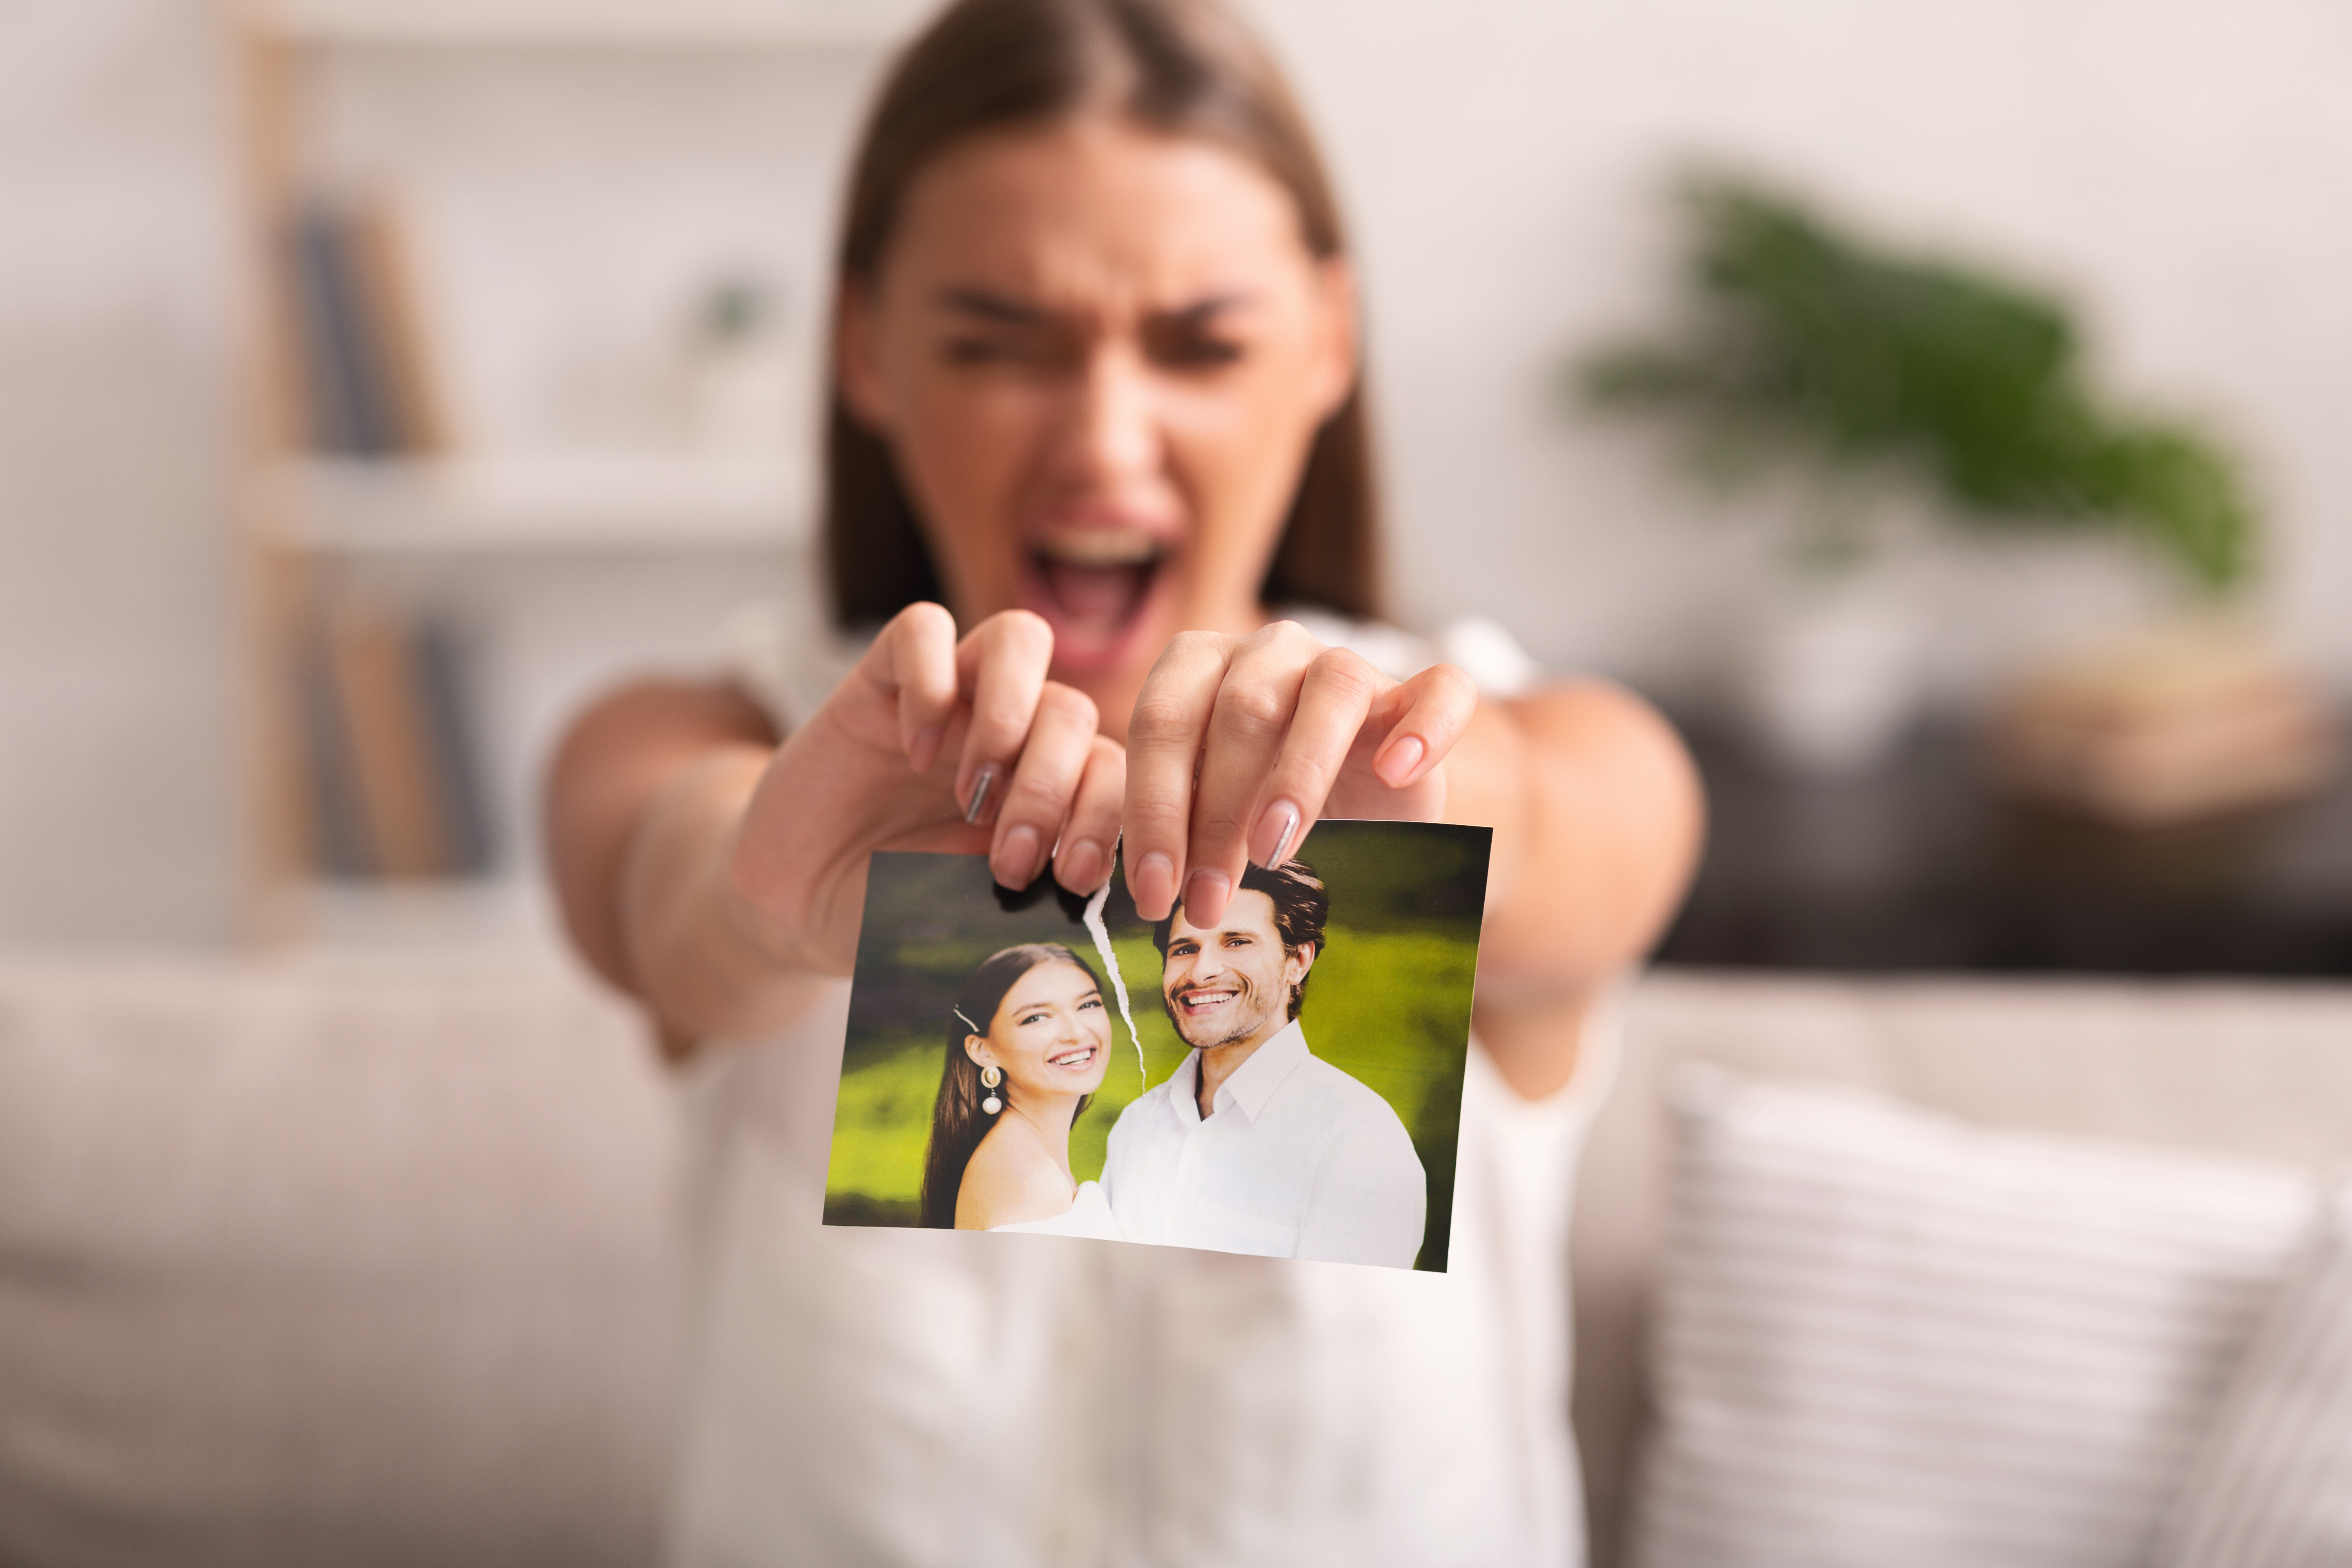 A woman tearing up a photo of her and a man | Source: Shutterstock